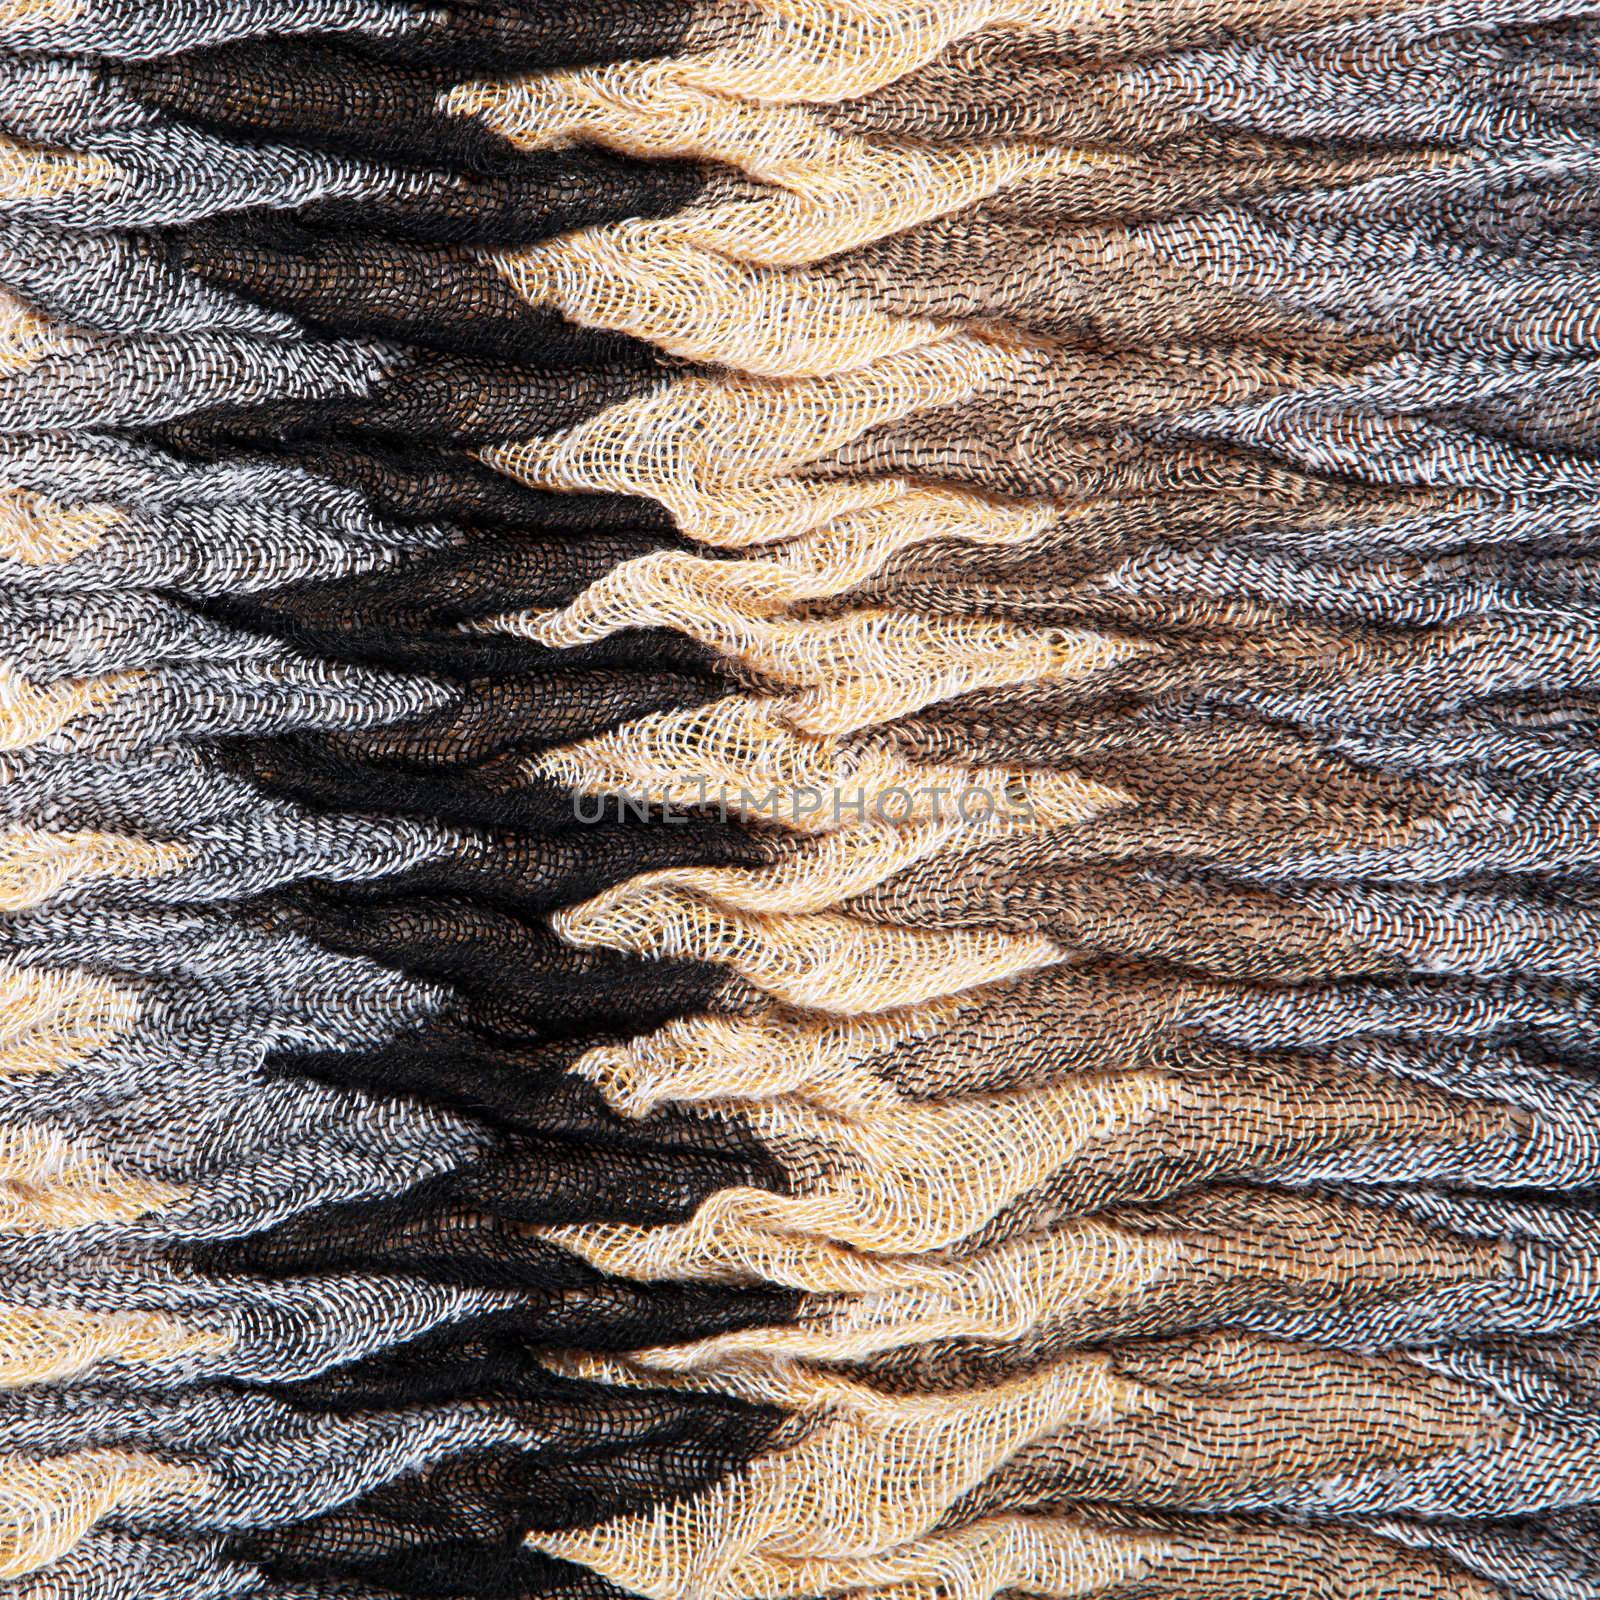 Luxurious knit textured ruched fabric with a distinctive zig-zag striped pattern in shades of brown and grey